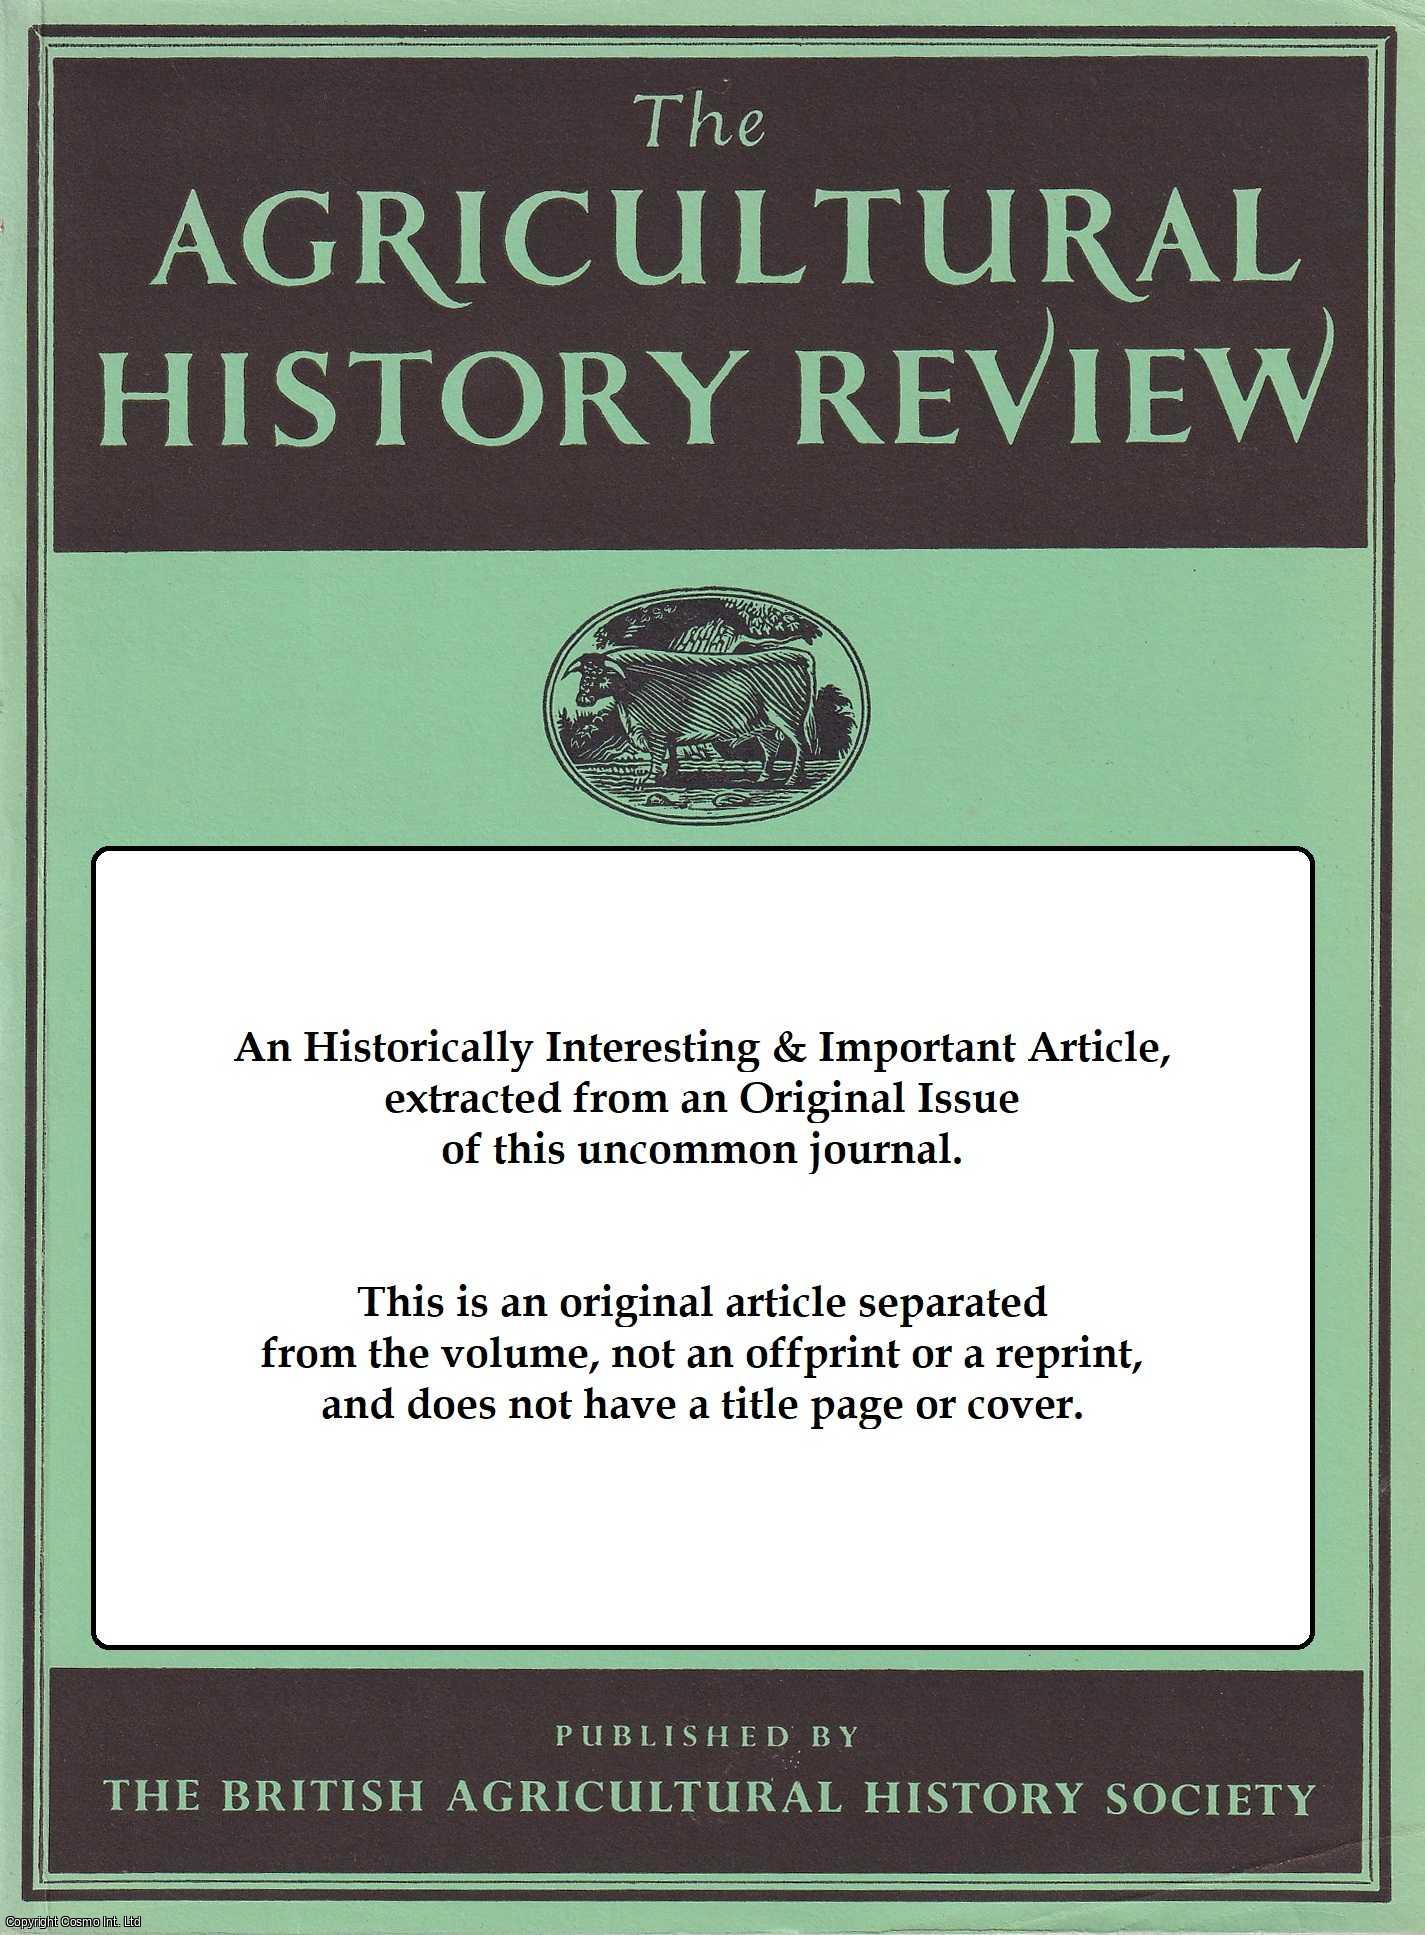 Sir Joseph Hutchinson - Erosion and Land Use : The Influence of Agriculture on the Epirus Region of Greece. An original article from the Agricultural History Review, 1969.